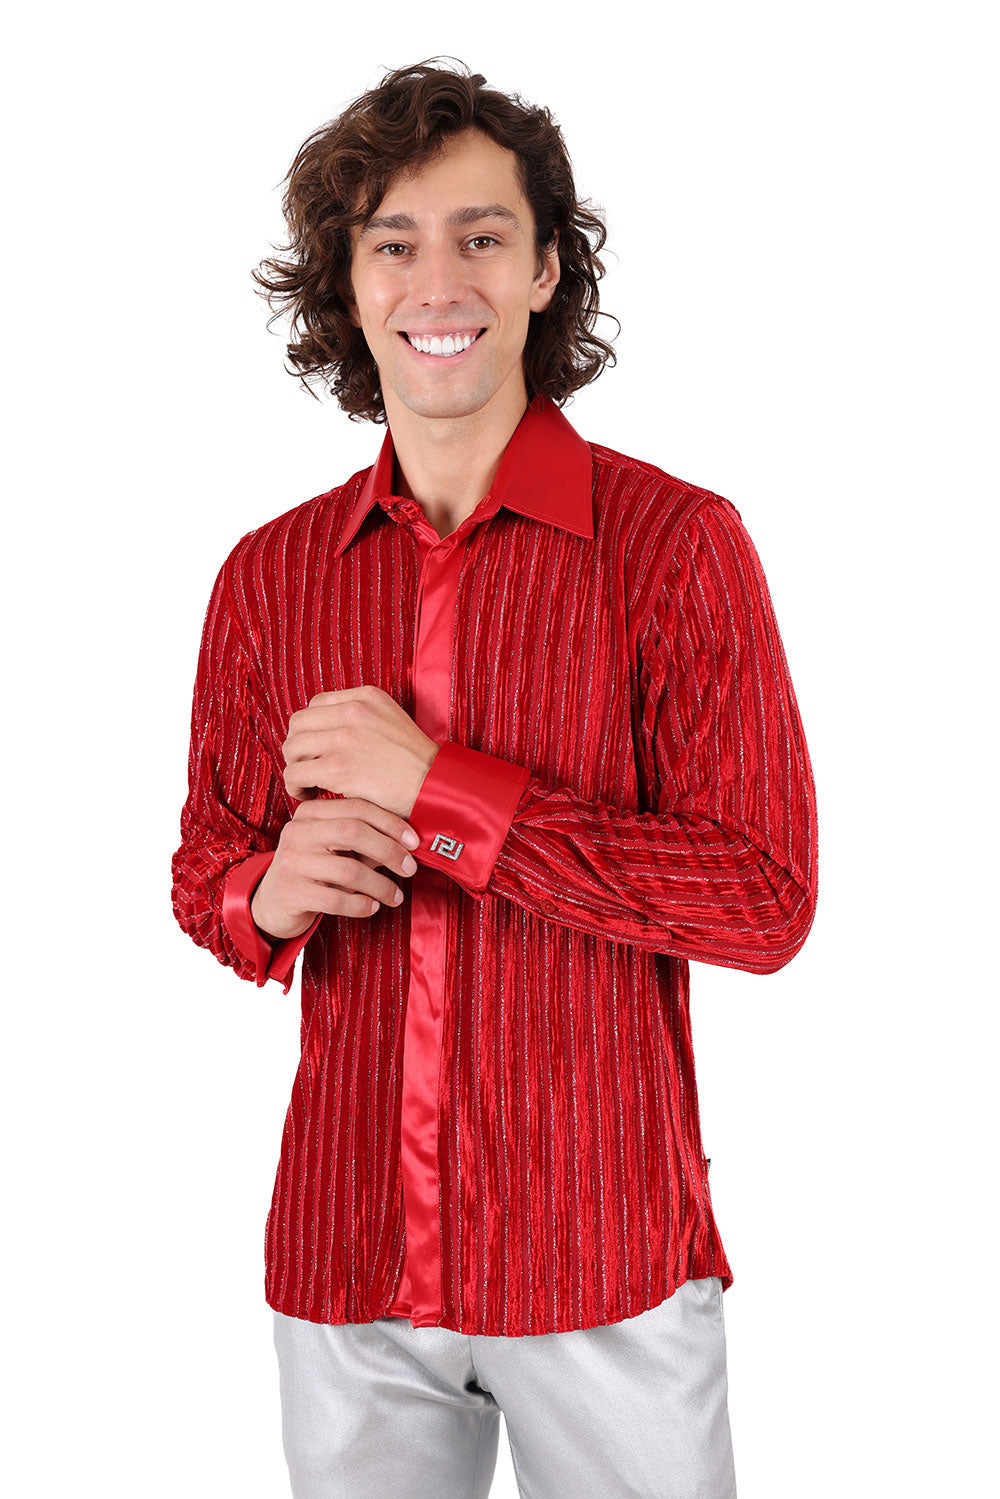 Barabas Men's French Cuff Long Sleeve Button Down Shirt 2FCS1001 Red